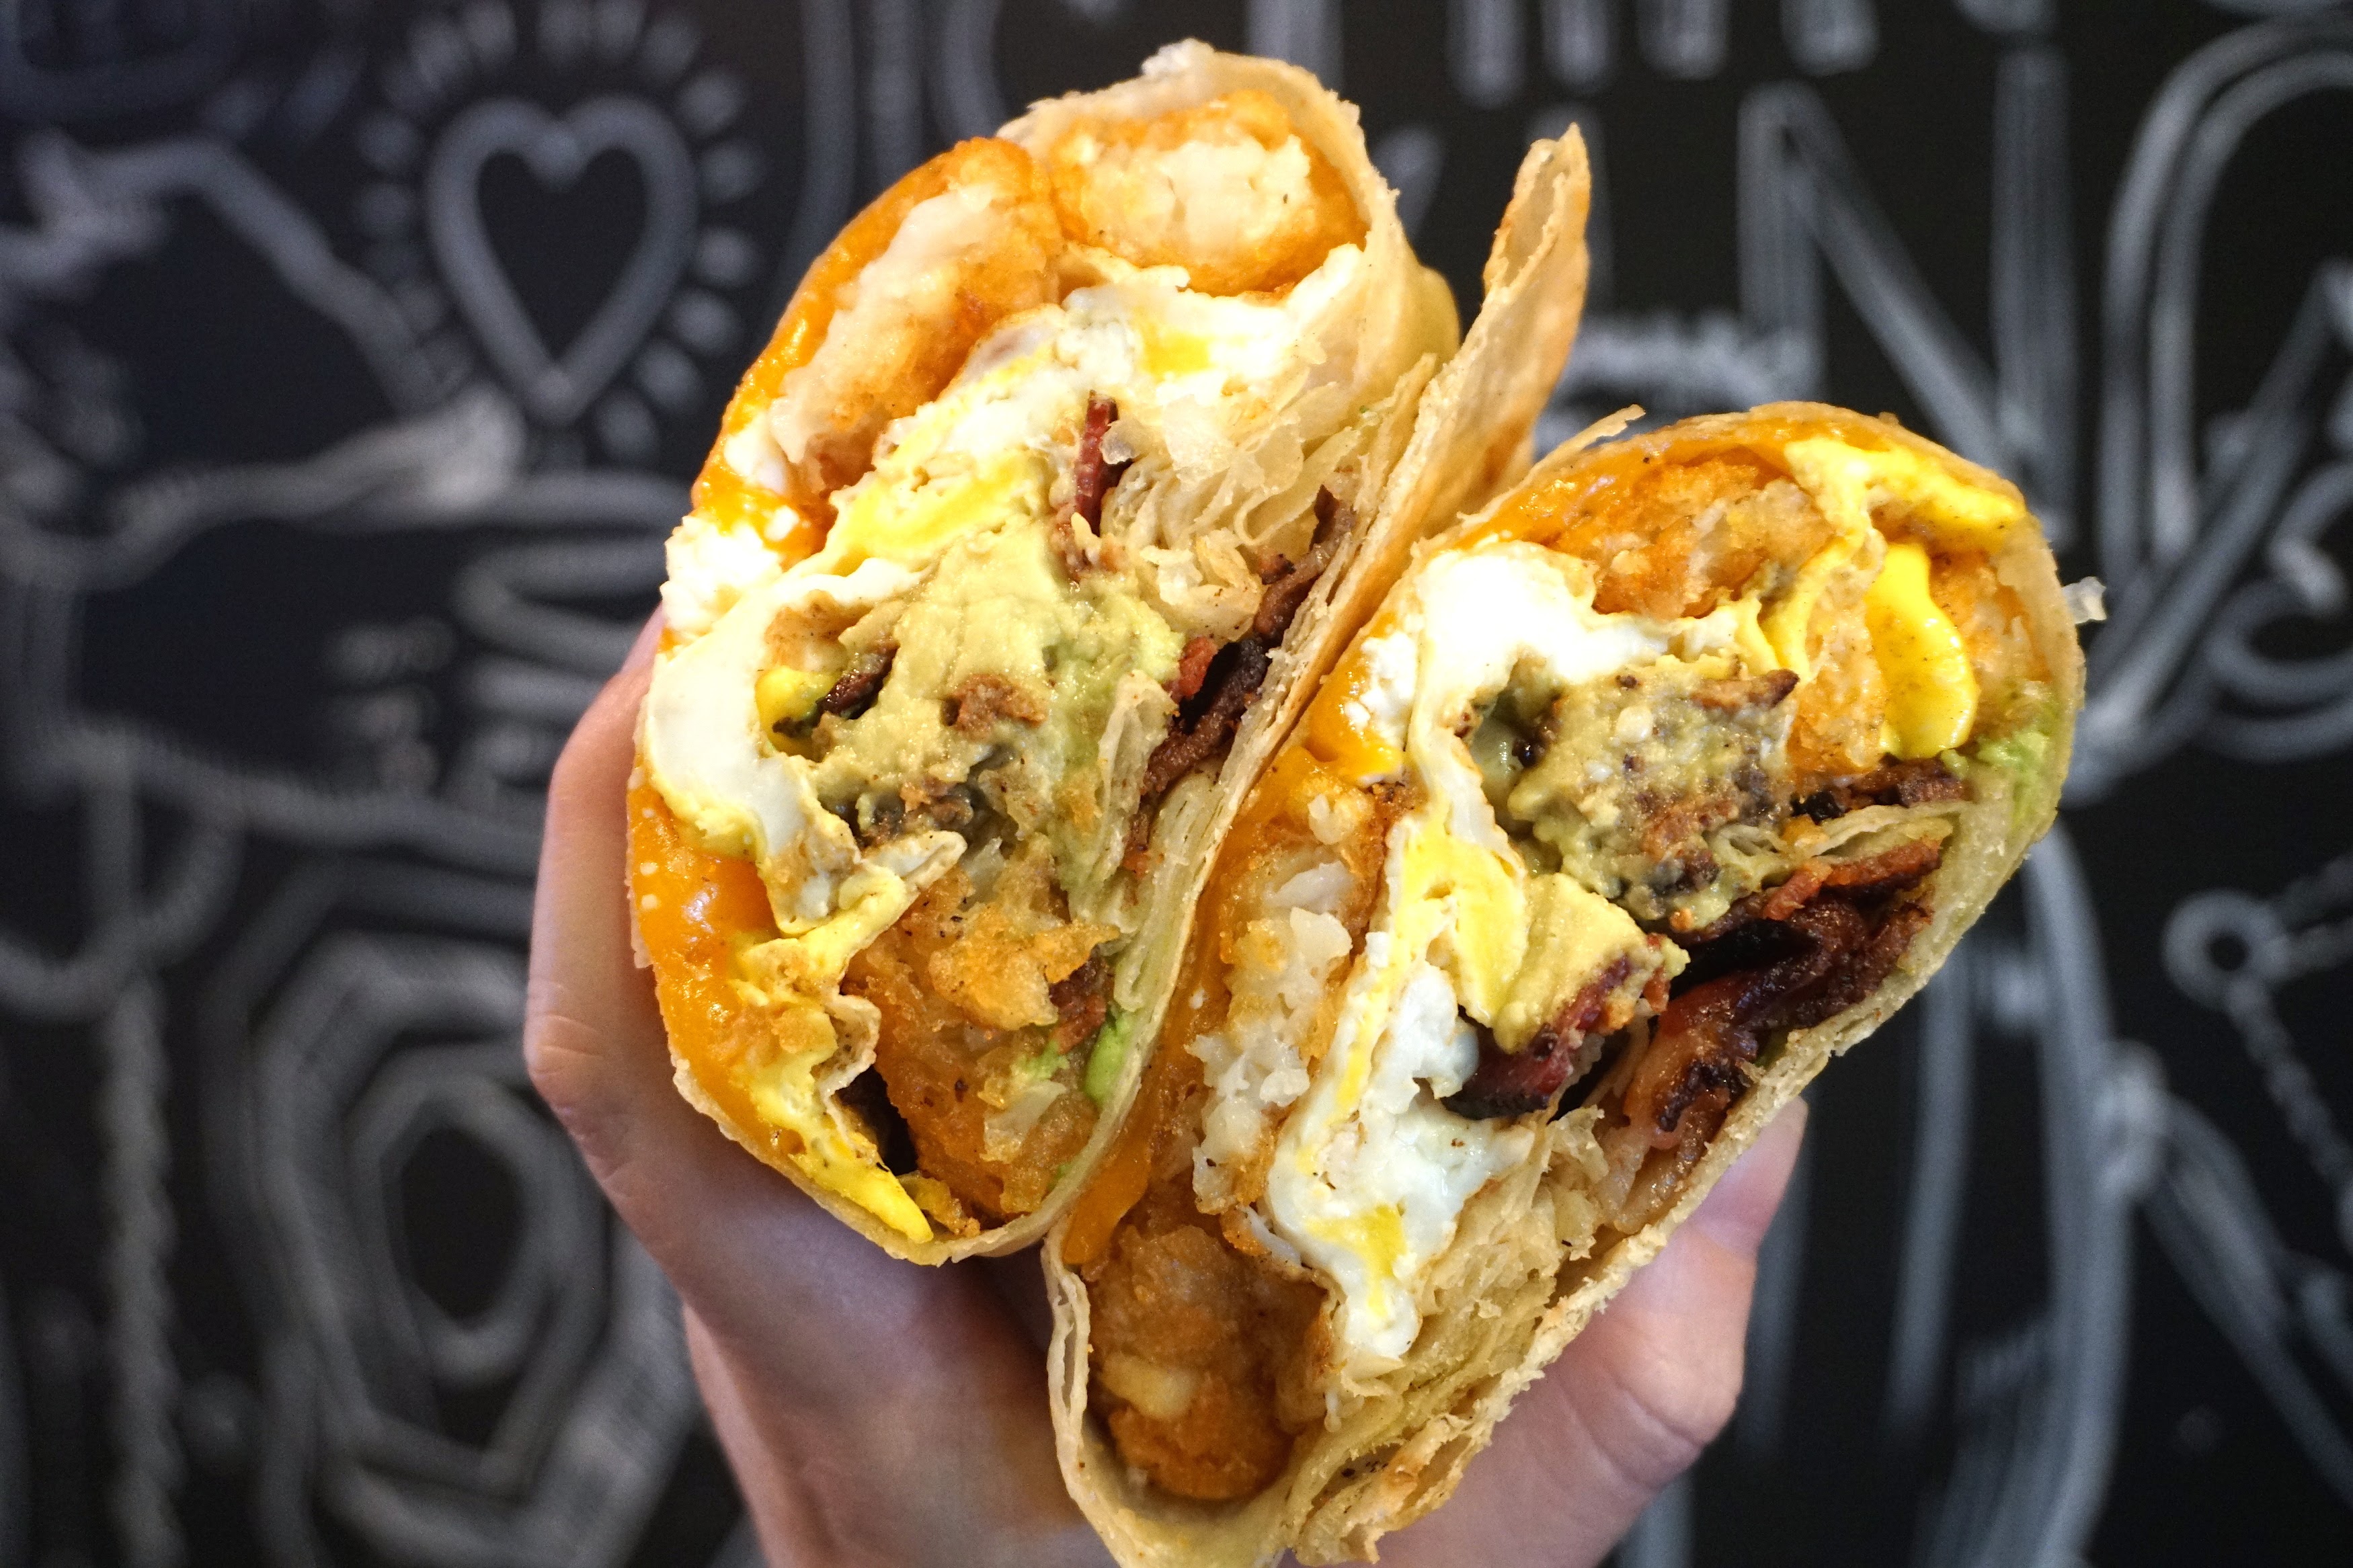 A breakfast burrito from The Rooster